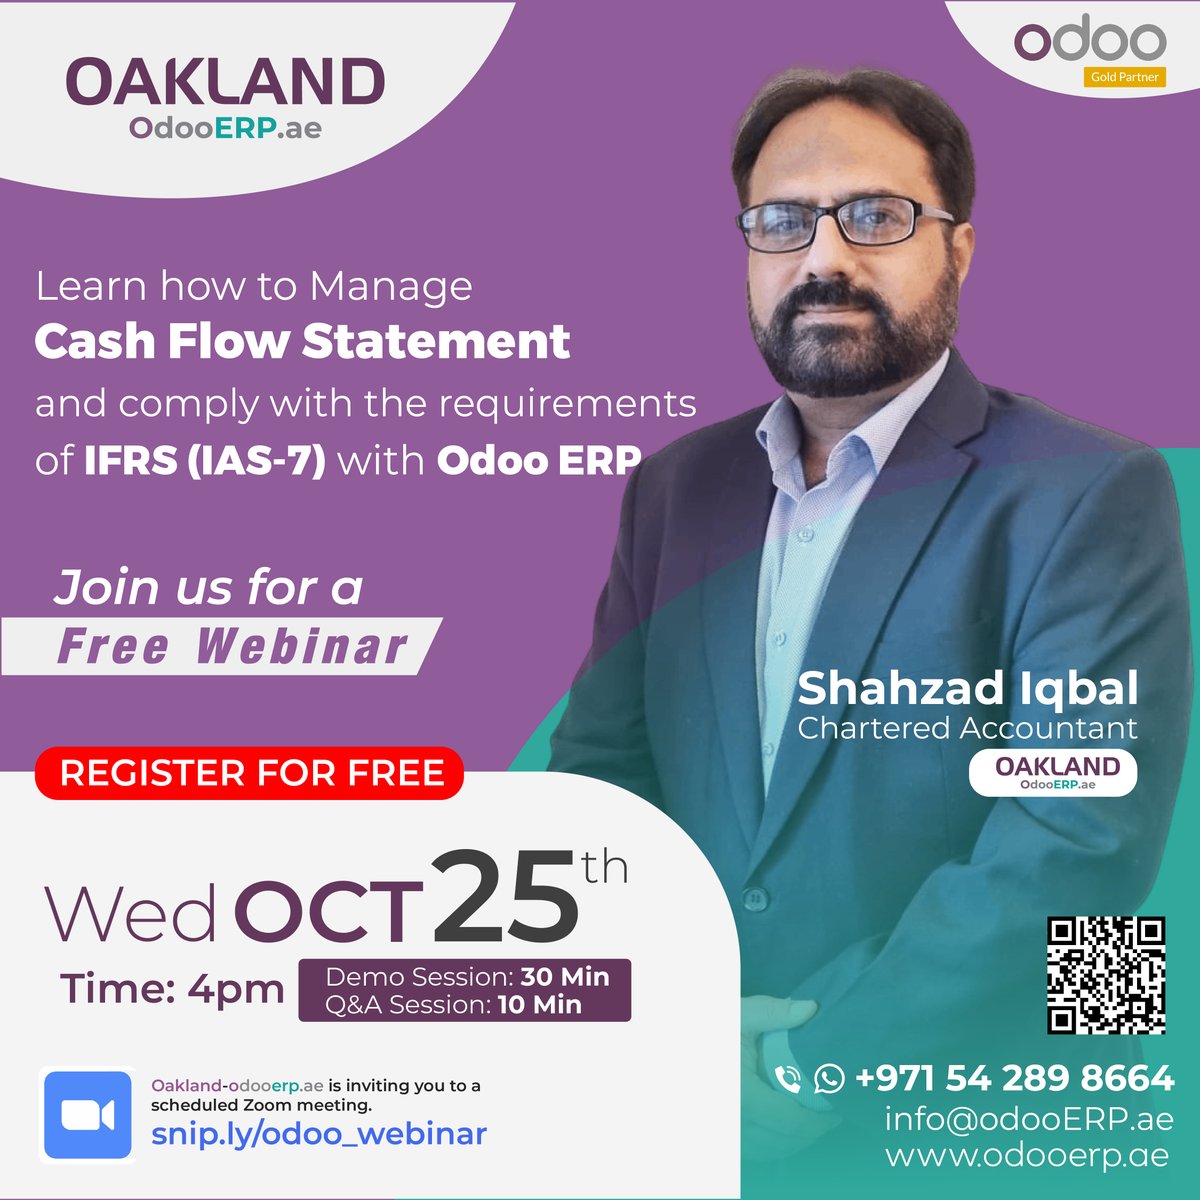 Limited seats available! 🤩 Learn how to manage cash flow statements with Odoo ERP in our upcoming webinar. 💰💳💸 Register now and get ready to take your financial management to the next level! 📈📉📊 #odoo #erp #cashflow #webinar #limitedseats #odoocommunity